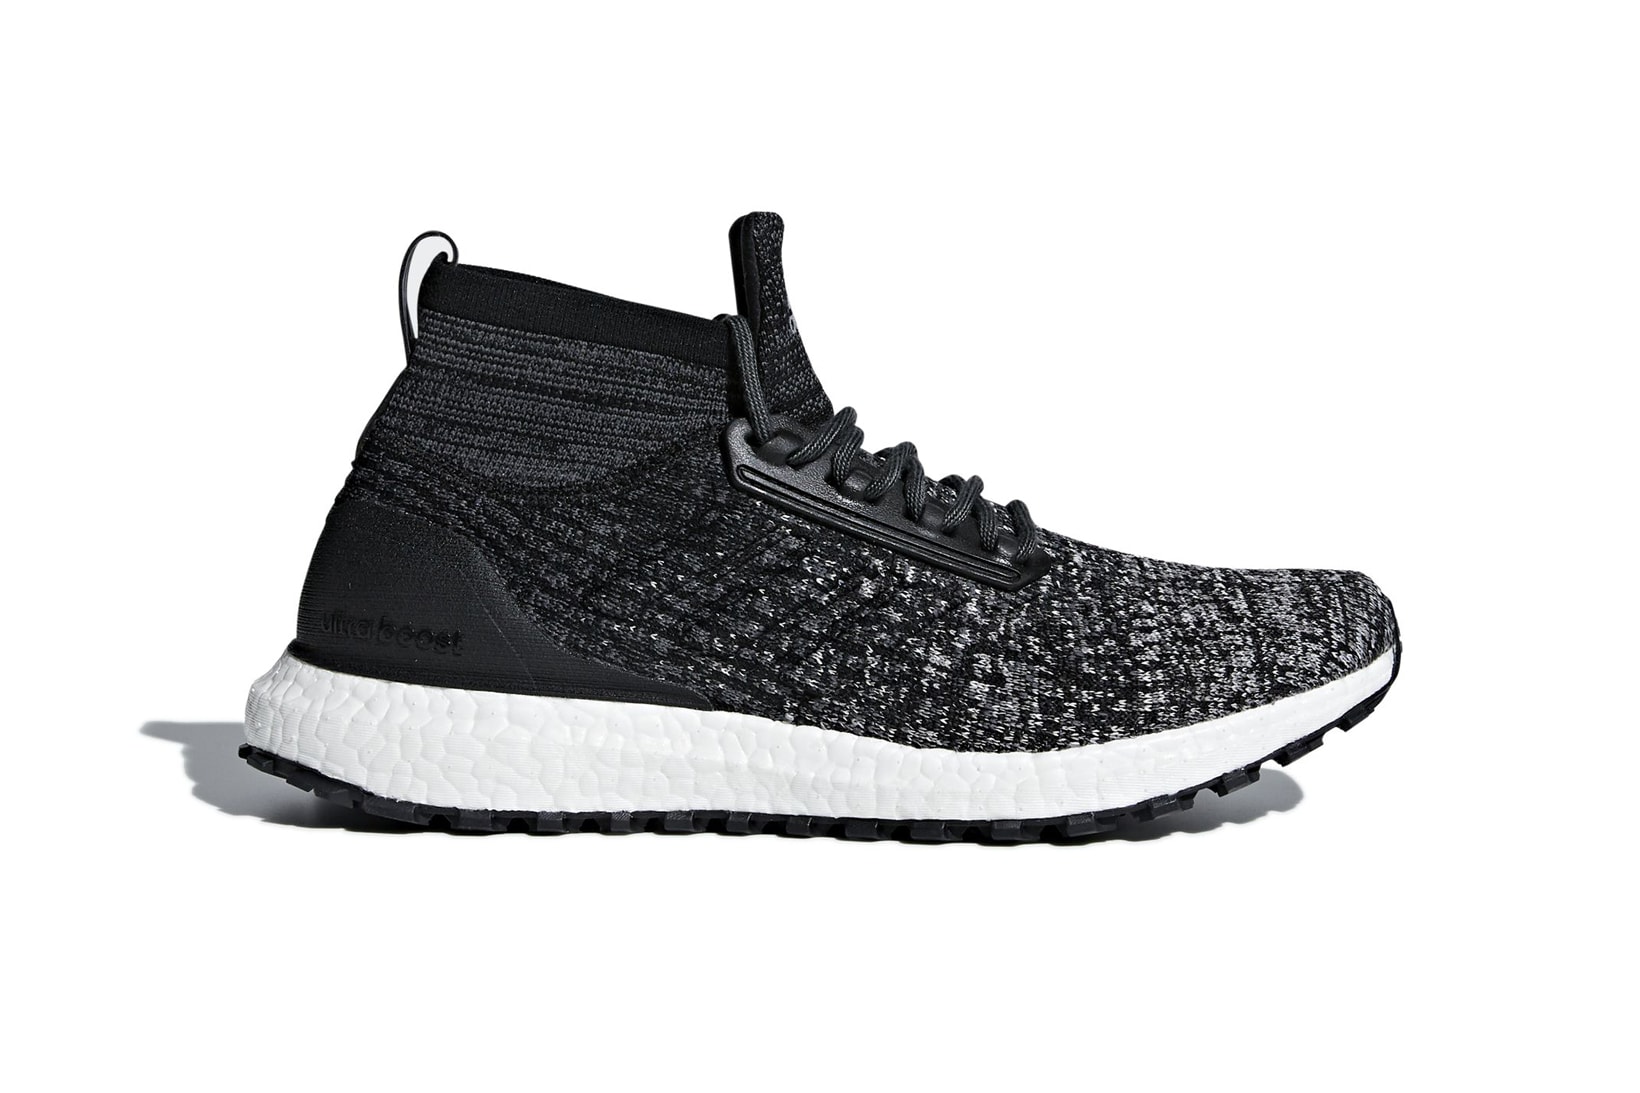 adidas Reigning Champ UltraBOOST Mid ATR Originals collaboration drop release date info 2018 february 14